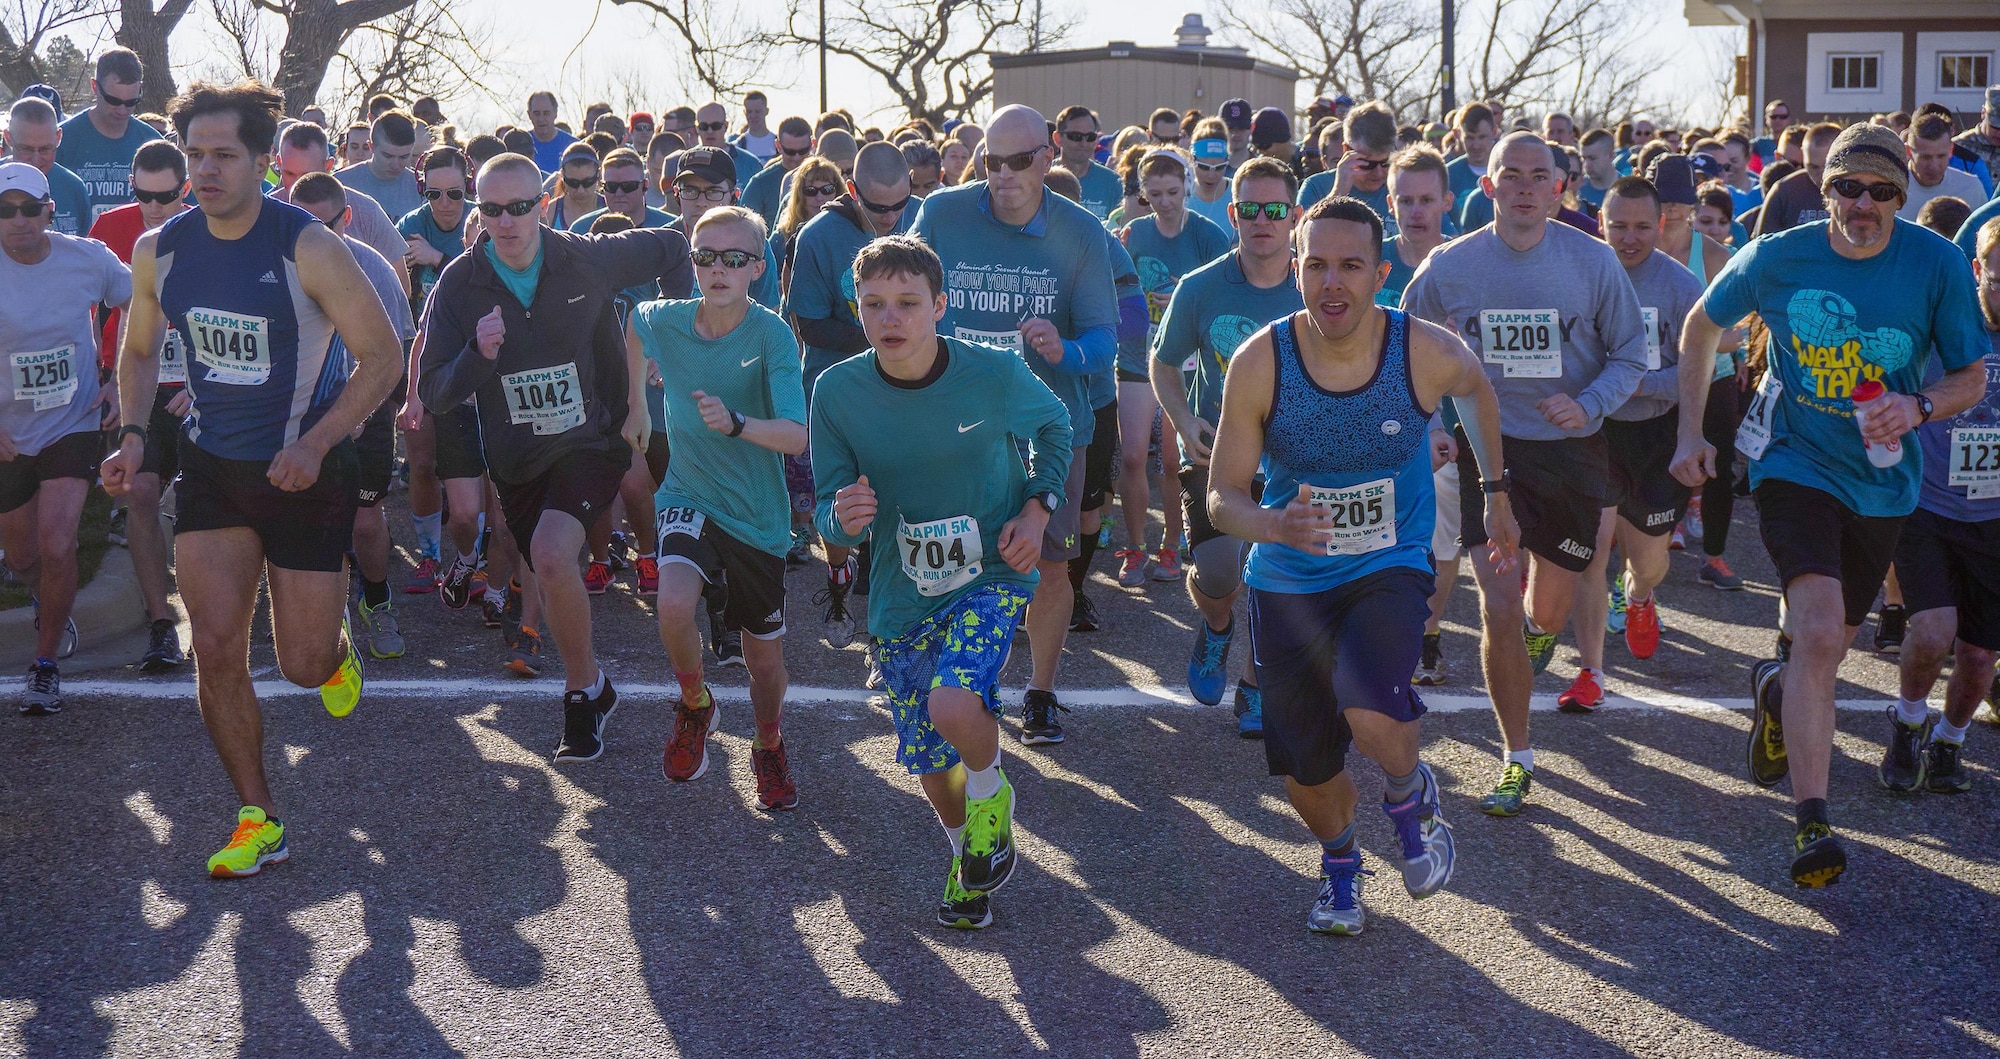 Participants take off from the starting line of the Sexual Assault Awareness 5-kilometer run April 9, 2016, in Lion’s Park, Cheyenne, Wyo. More than 500 participants – including Airmen, Soldiers, Guardsmen and community members – ran, walked and ruck-marched the course. (U.S. Air Force photo by Senior Airman Brandon Valle)